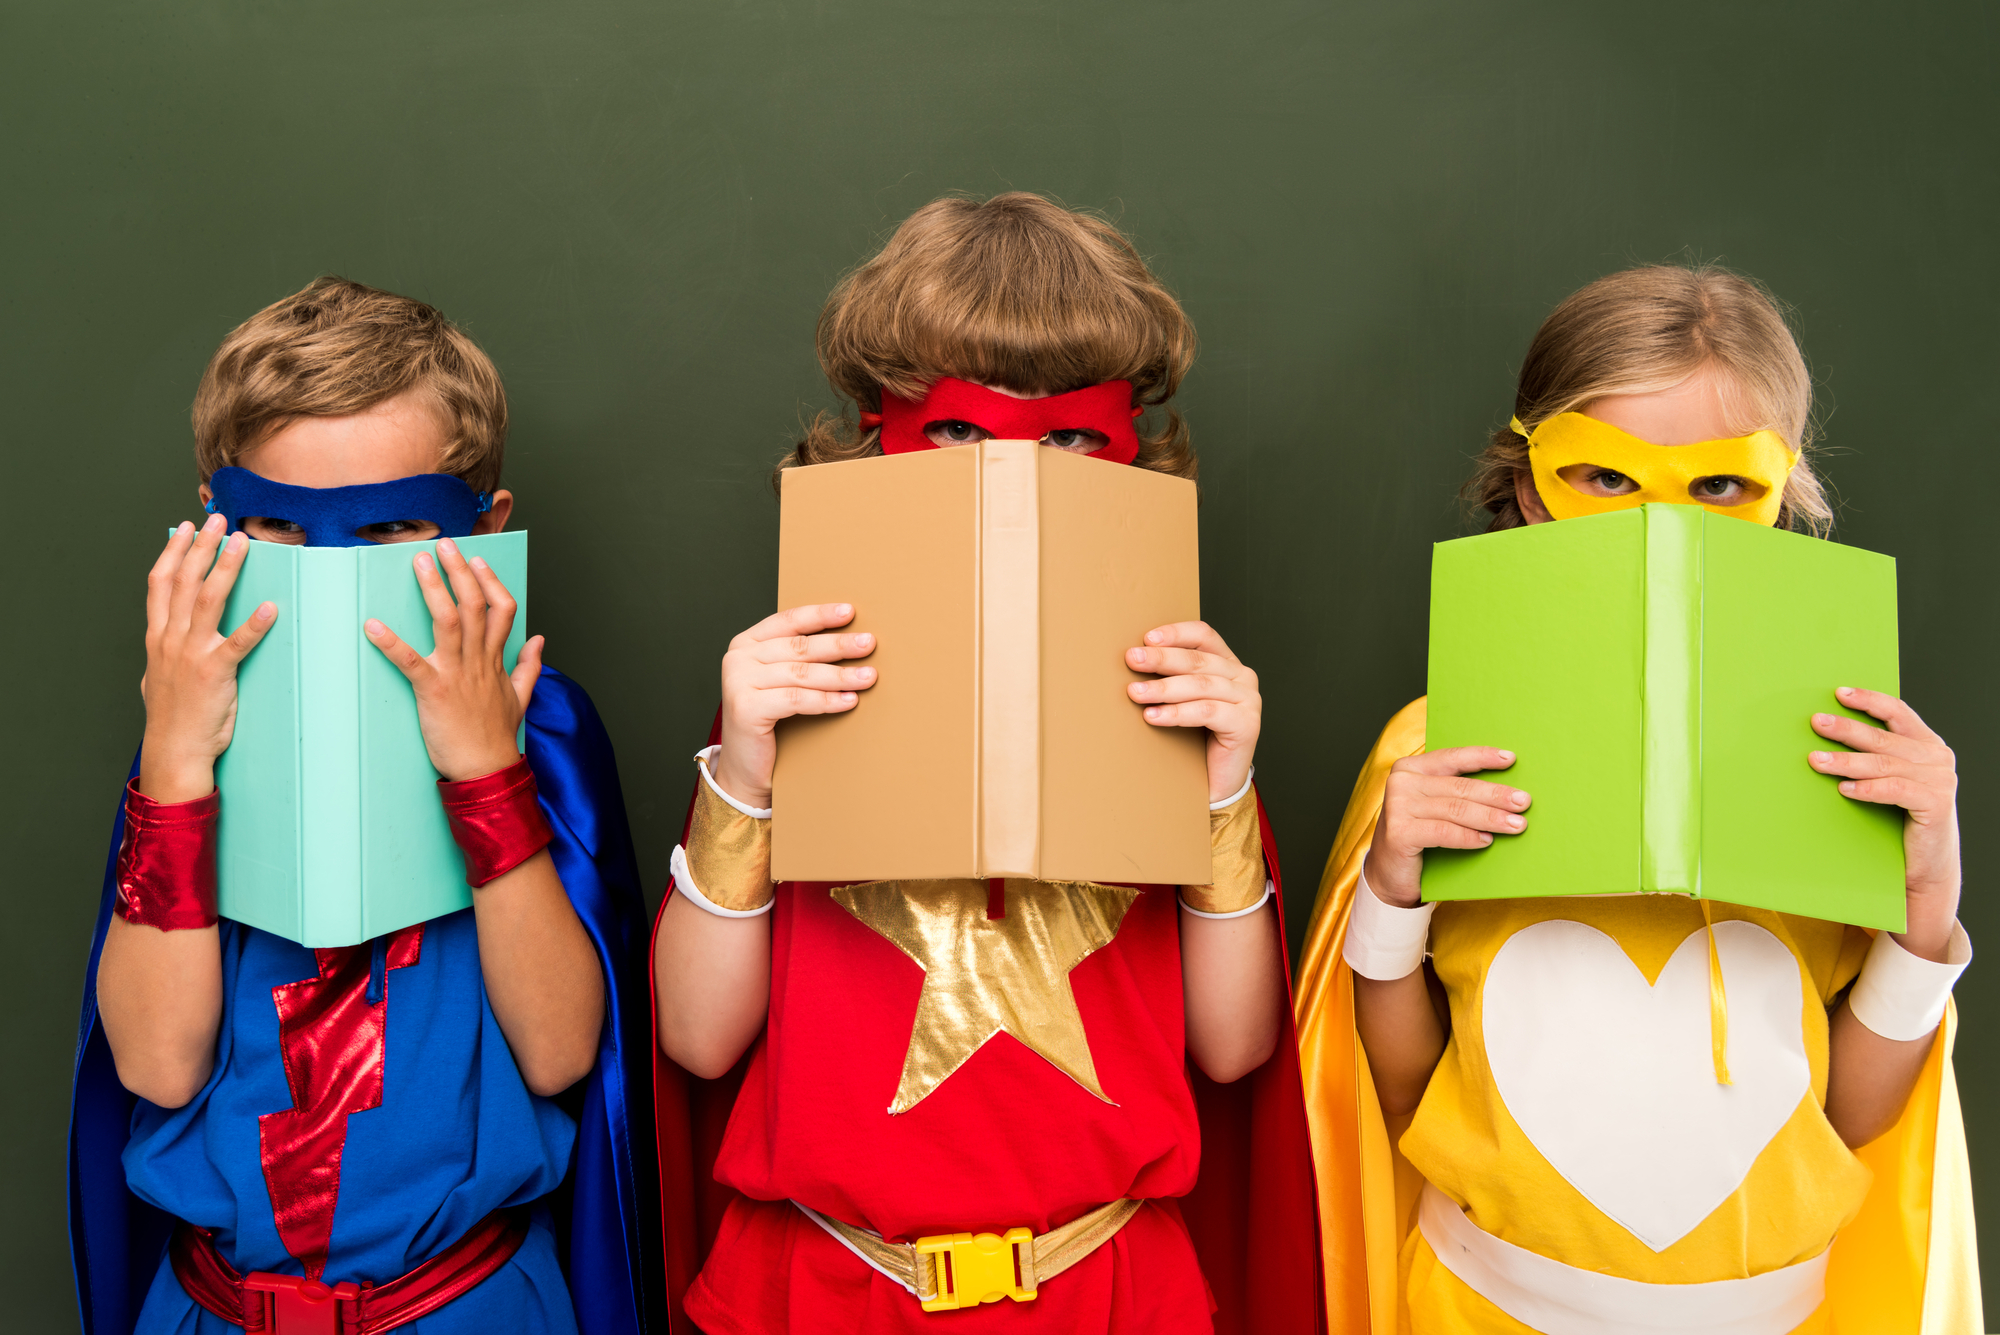 Three children dressed up as superheroes holding books, taking part in November's Fun-Filled Adventures Near Harbor Park Garage!